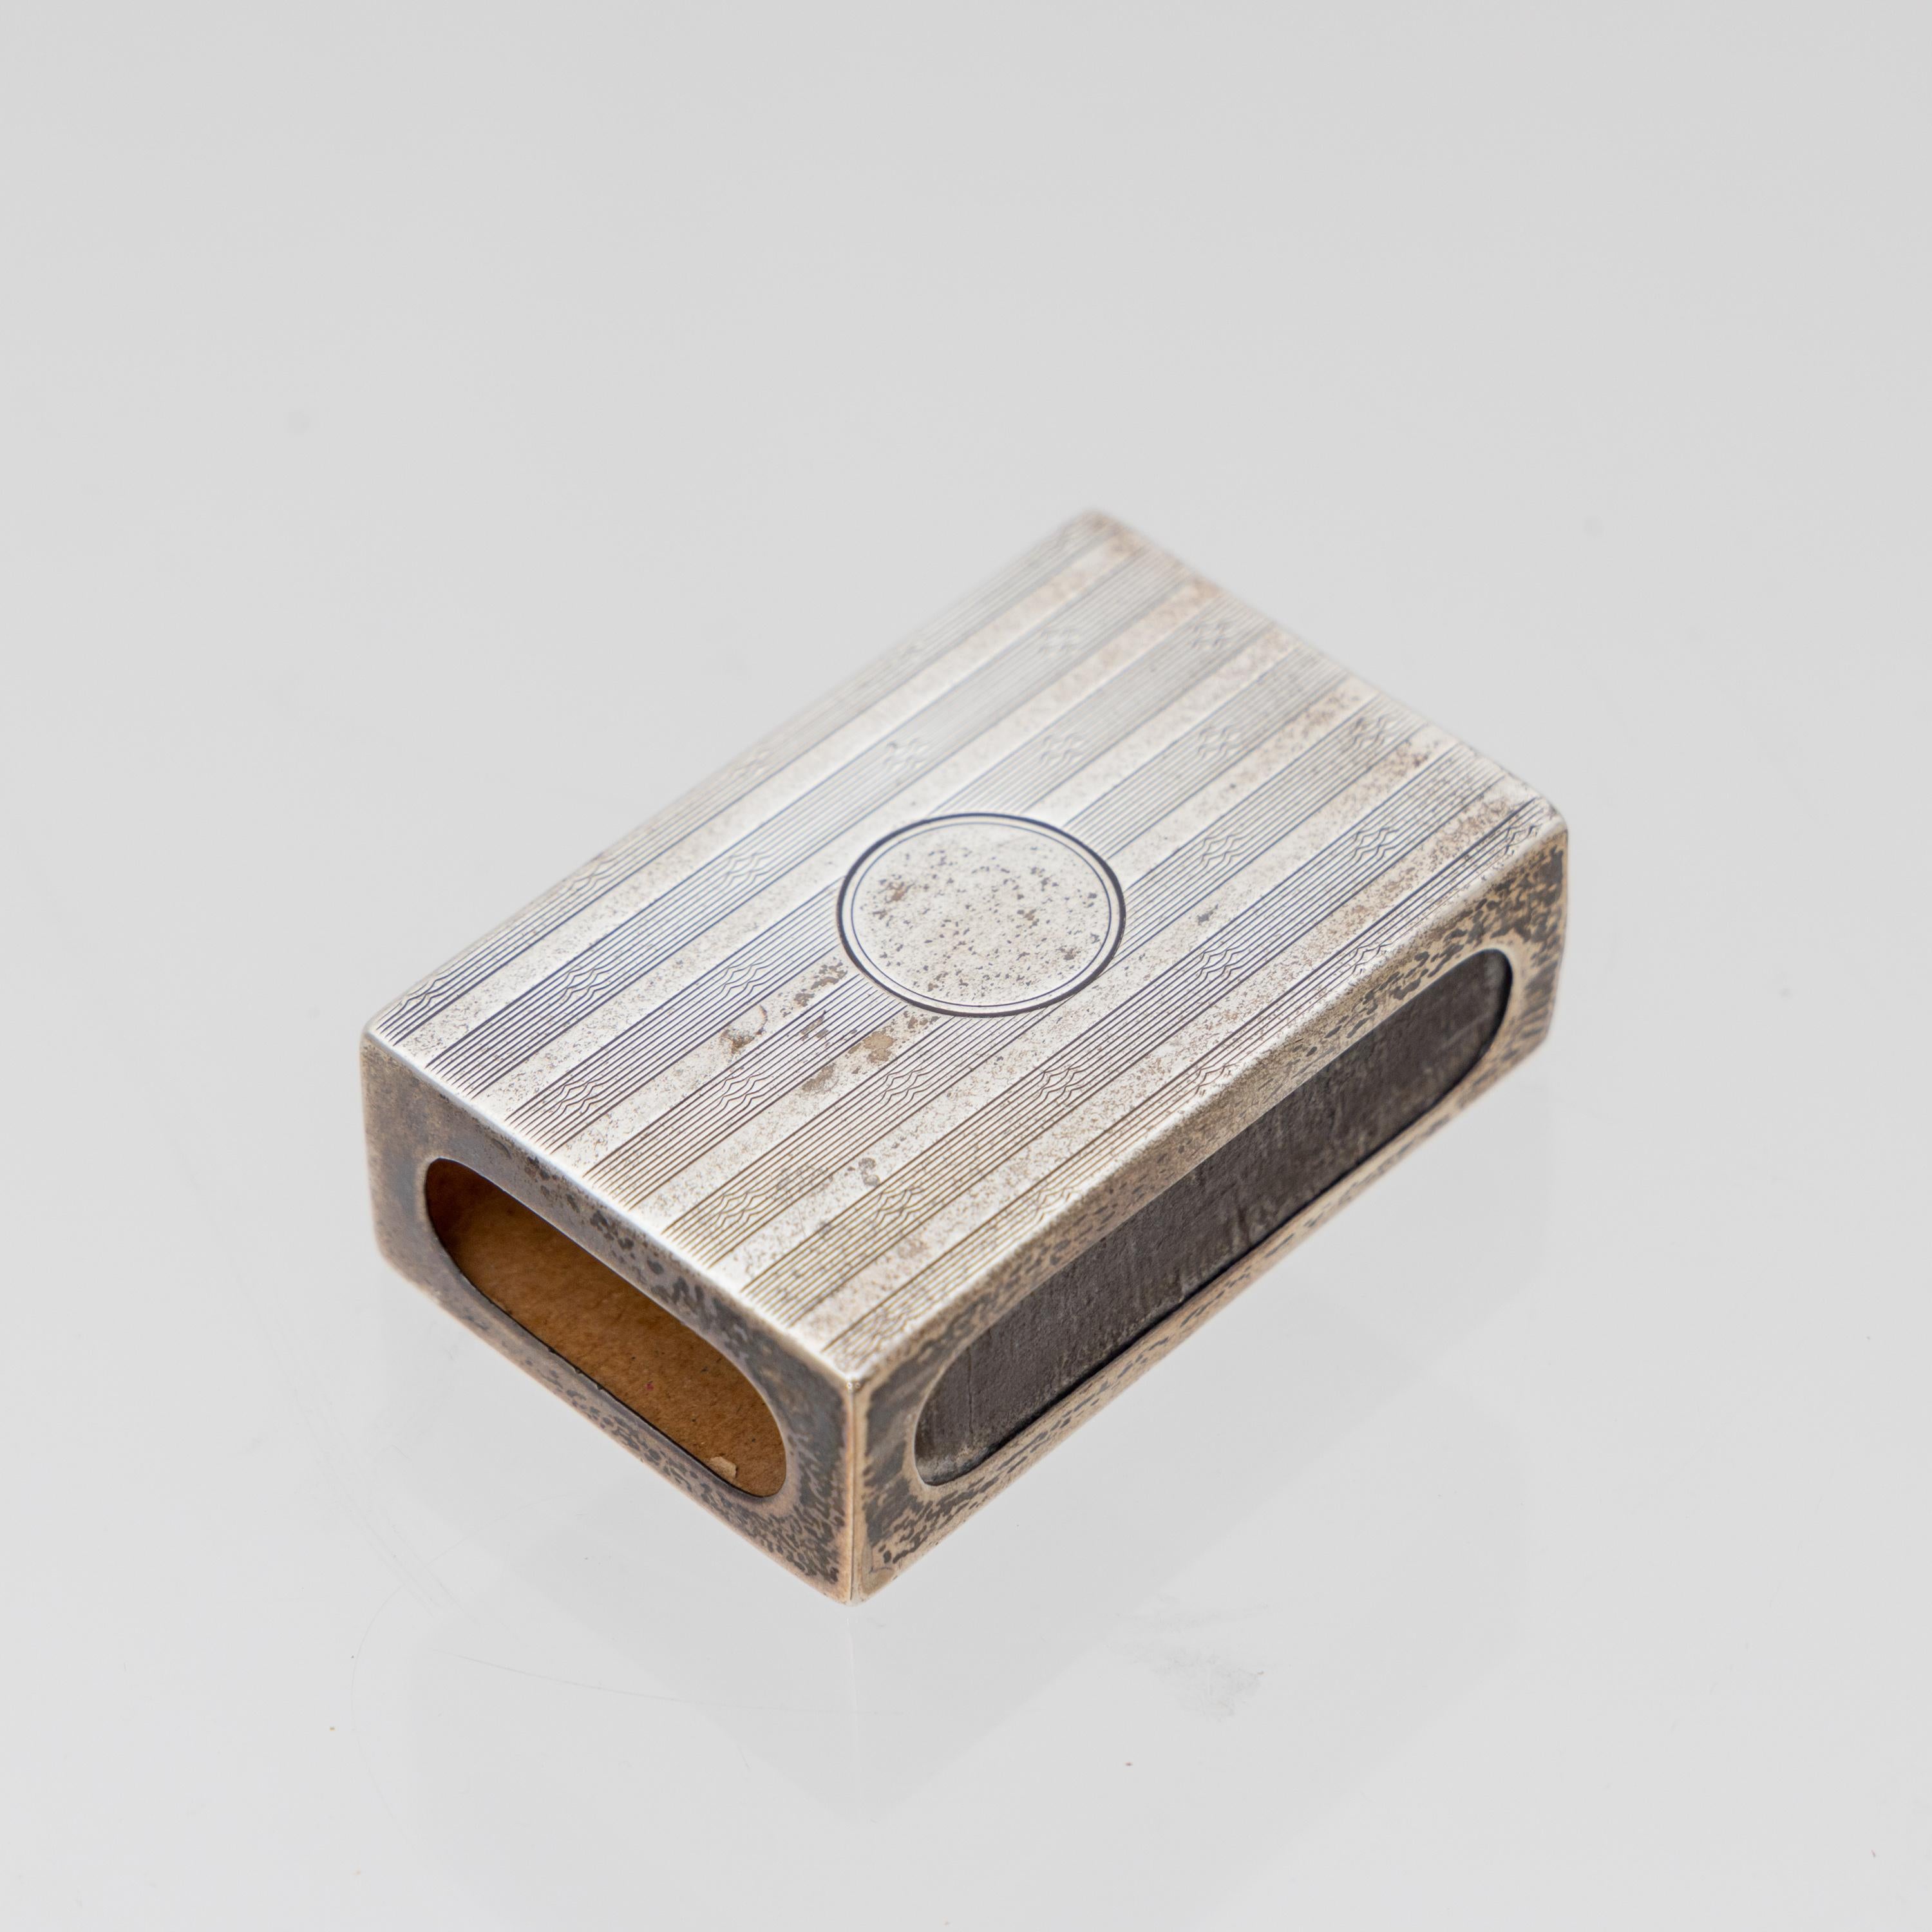 Early 20th Century Silver Matchstick Cover, England 1912